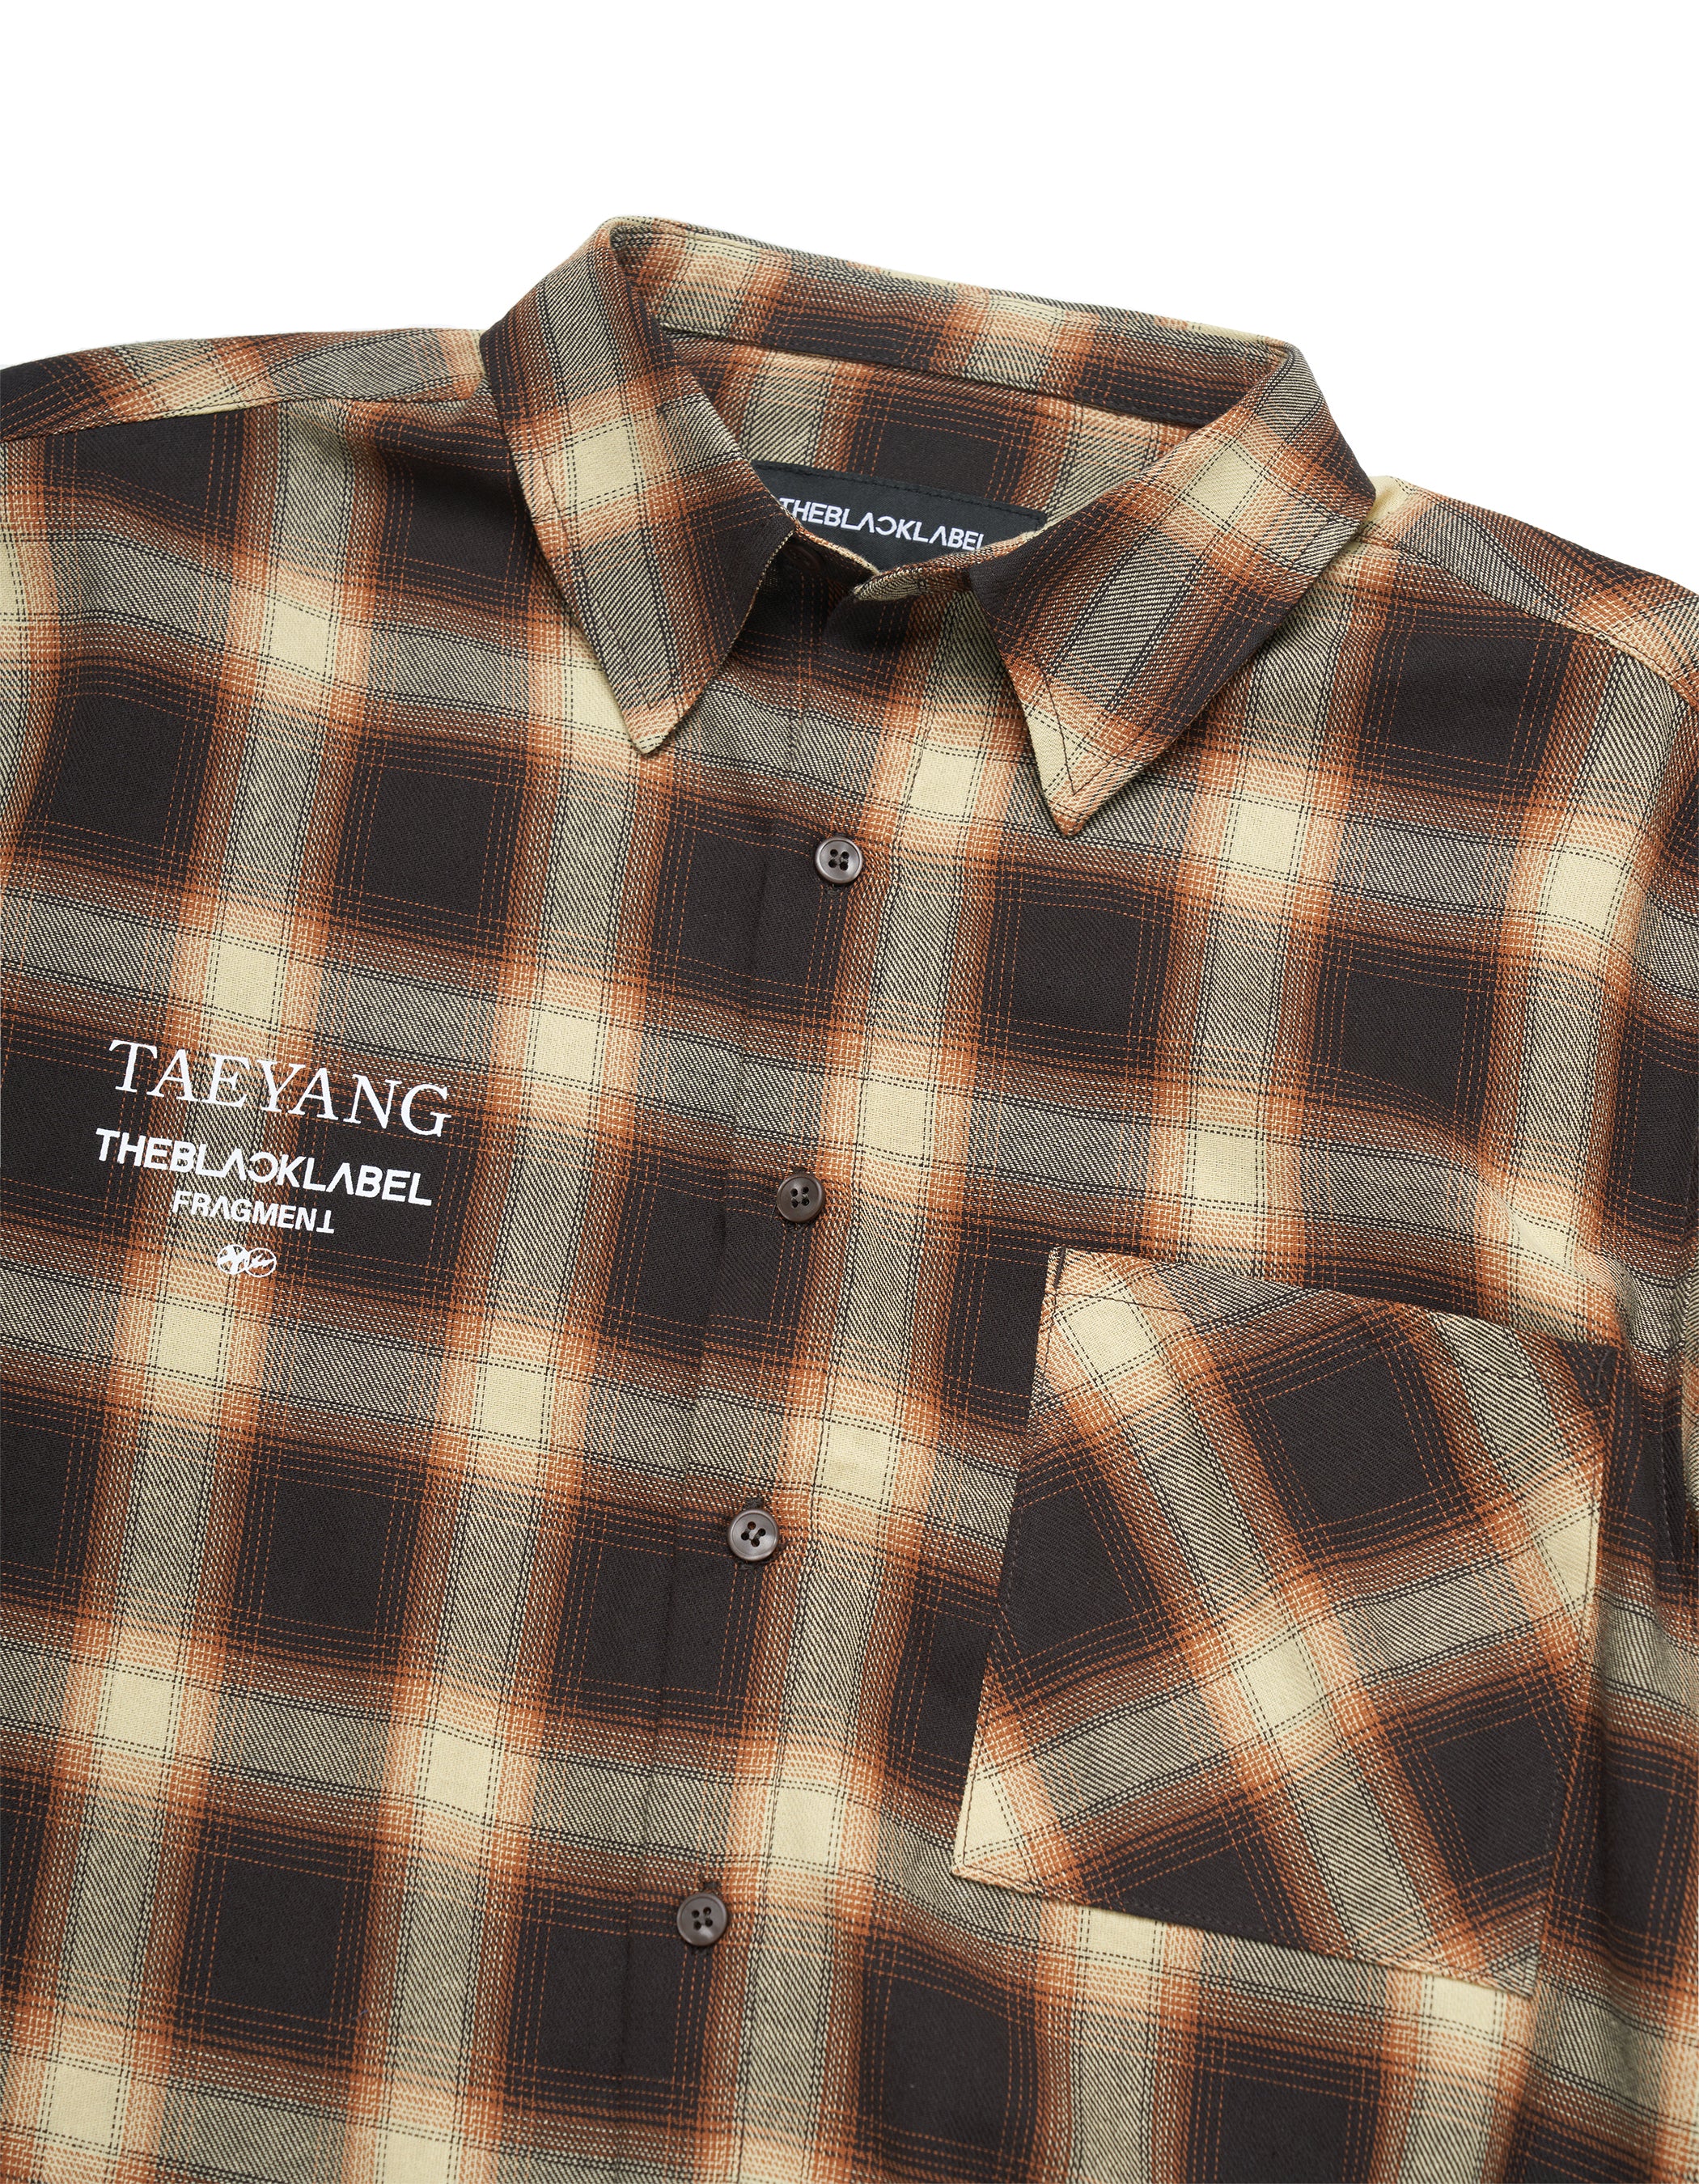 TAEYANG x Fragment Design DIIE Flannel Shirt Front Detail